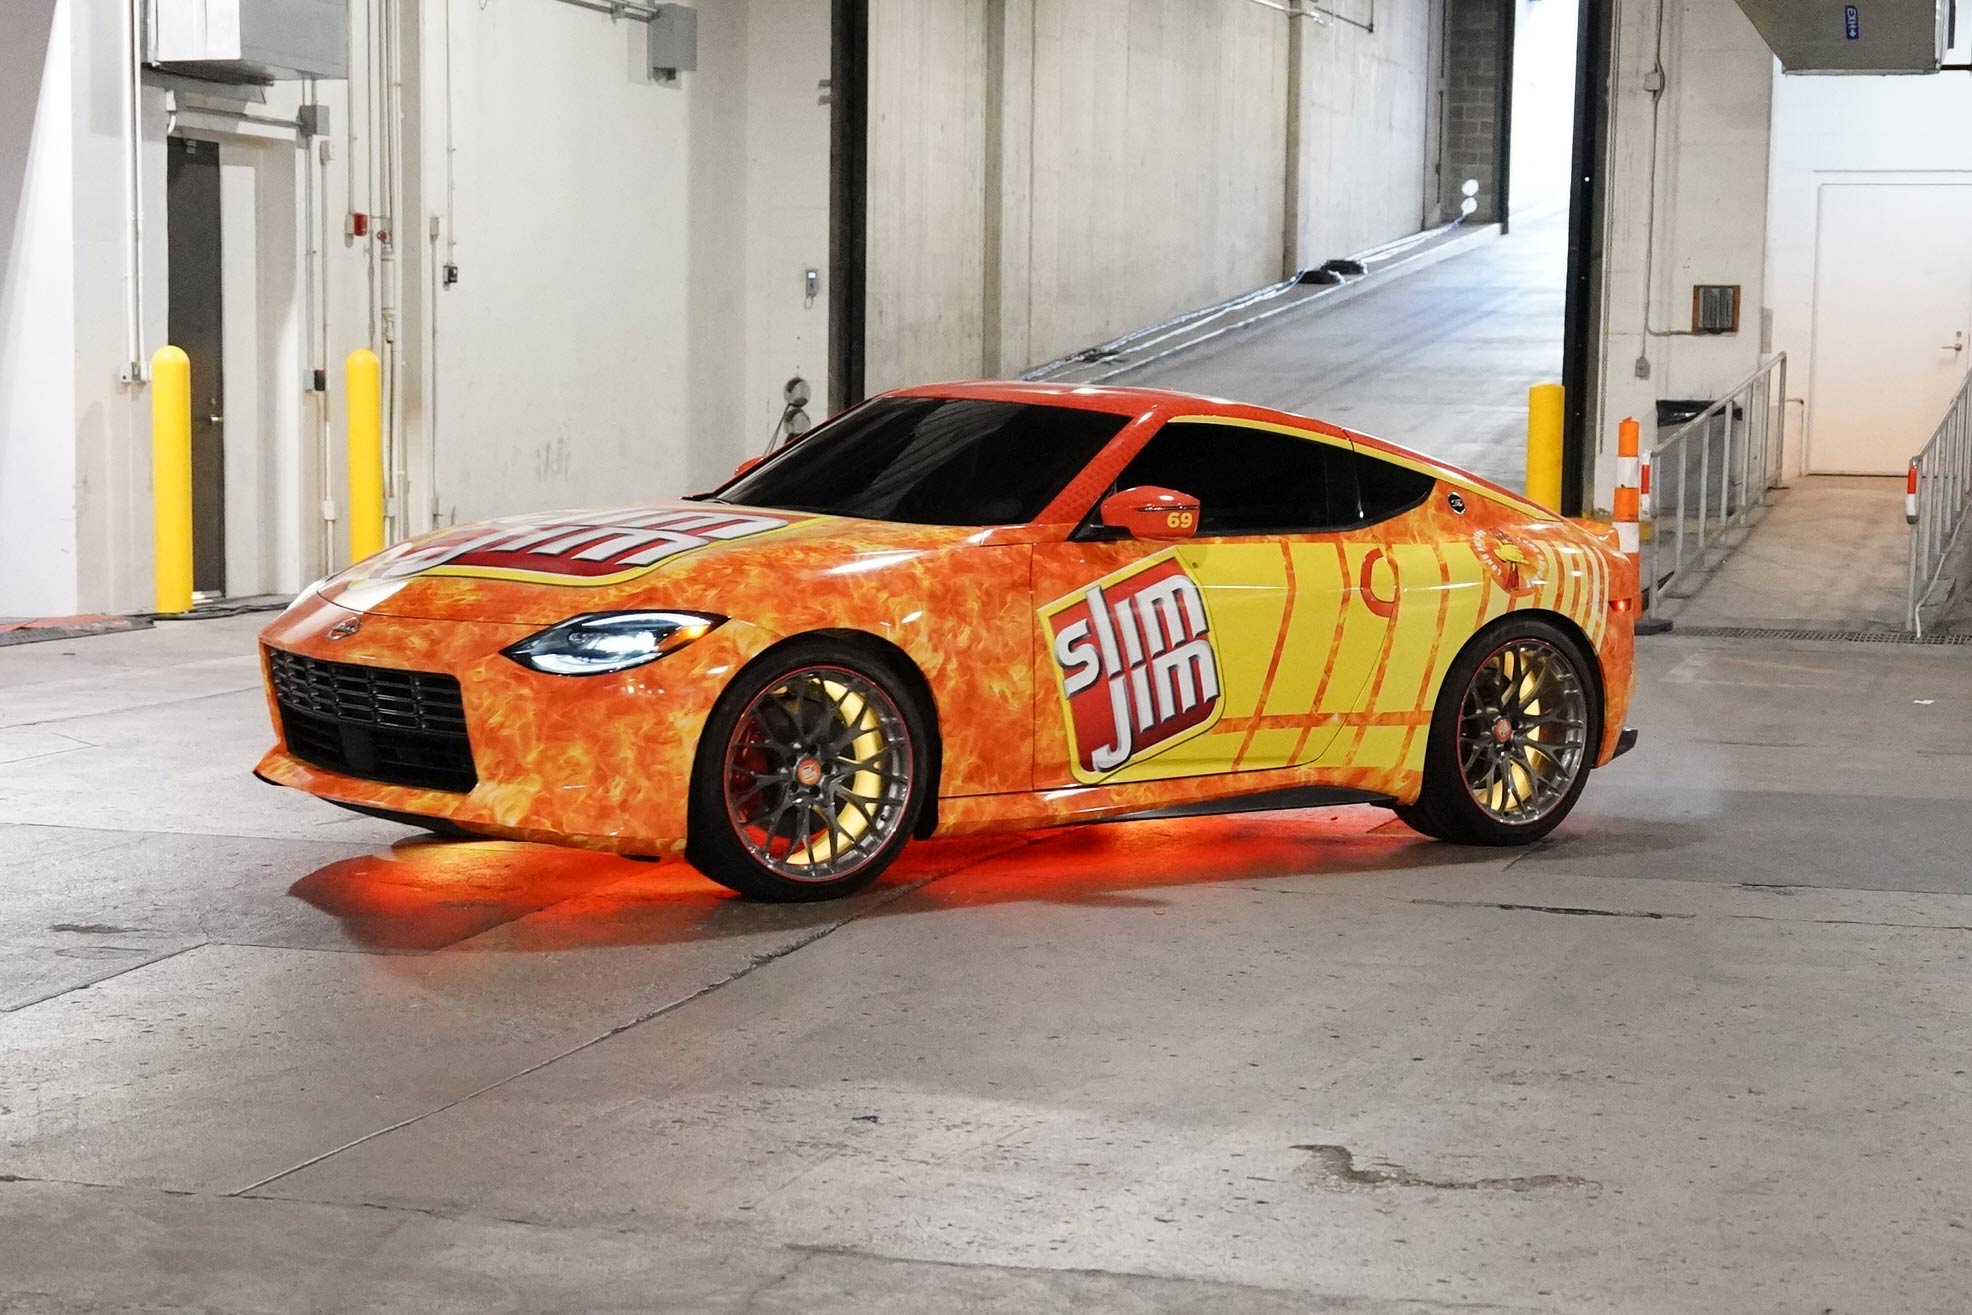 Fast Meat Found: Stolen Slim Jim Car Recovered Outside Chicago - Bloomberg